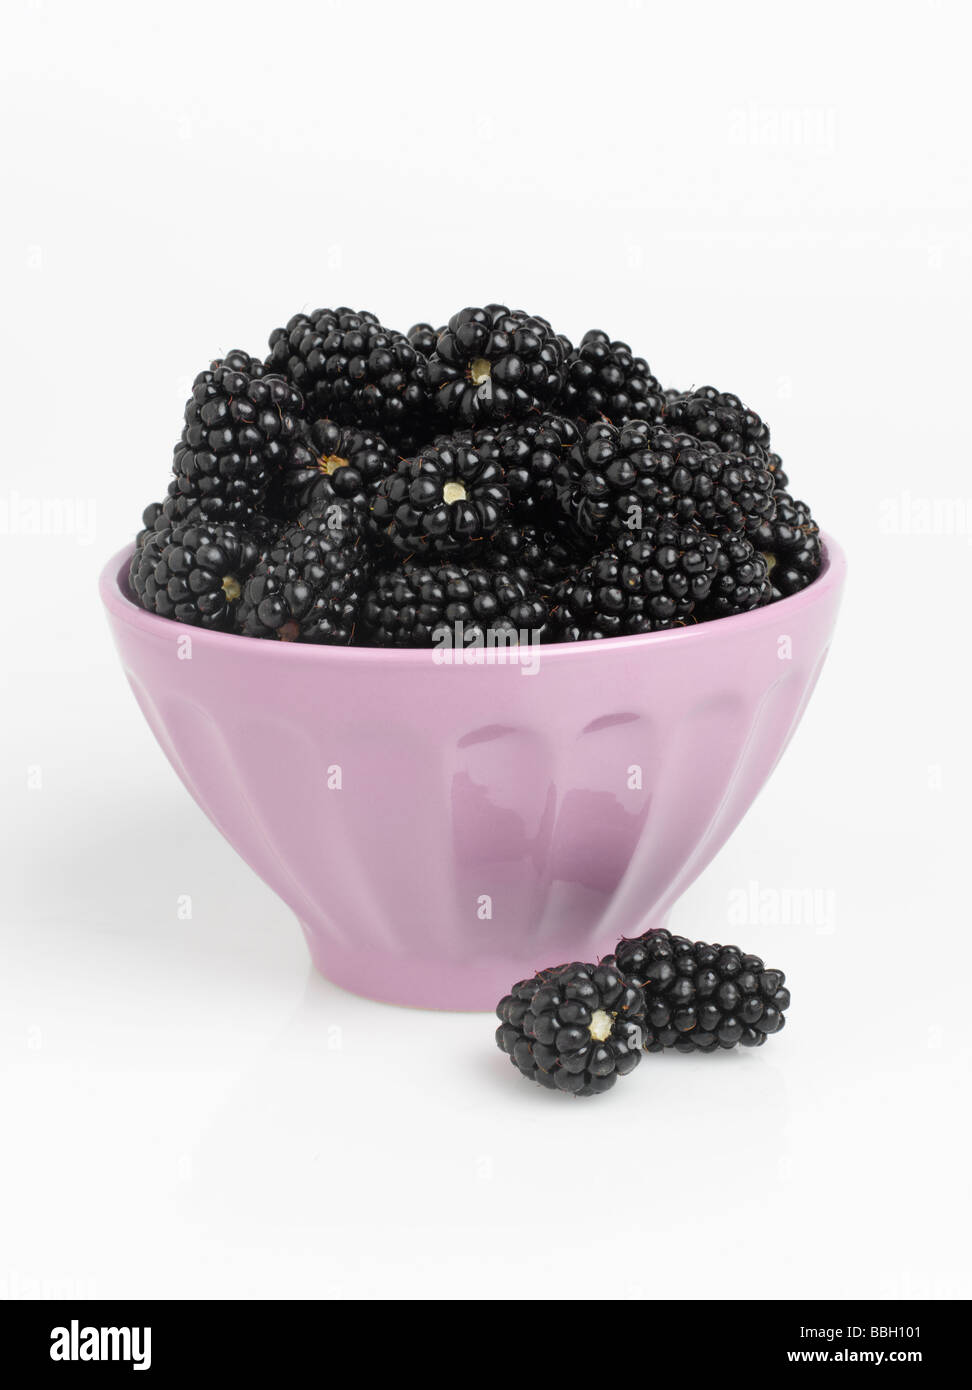 Bowl of blackberries isolated on white background Stock Photo